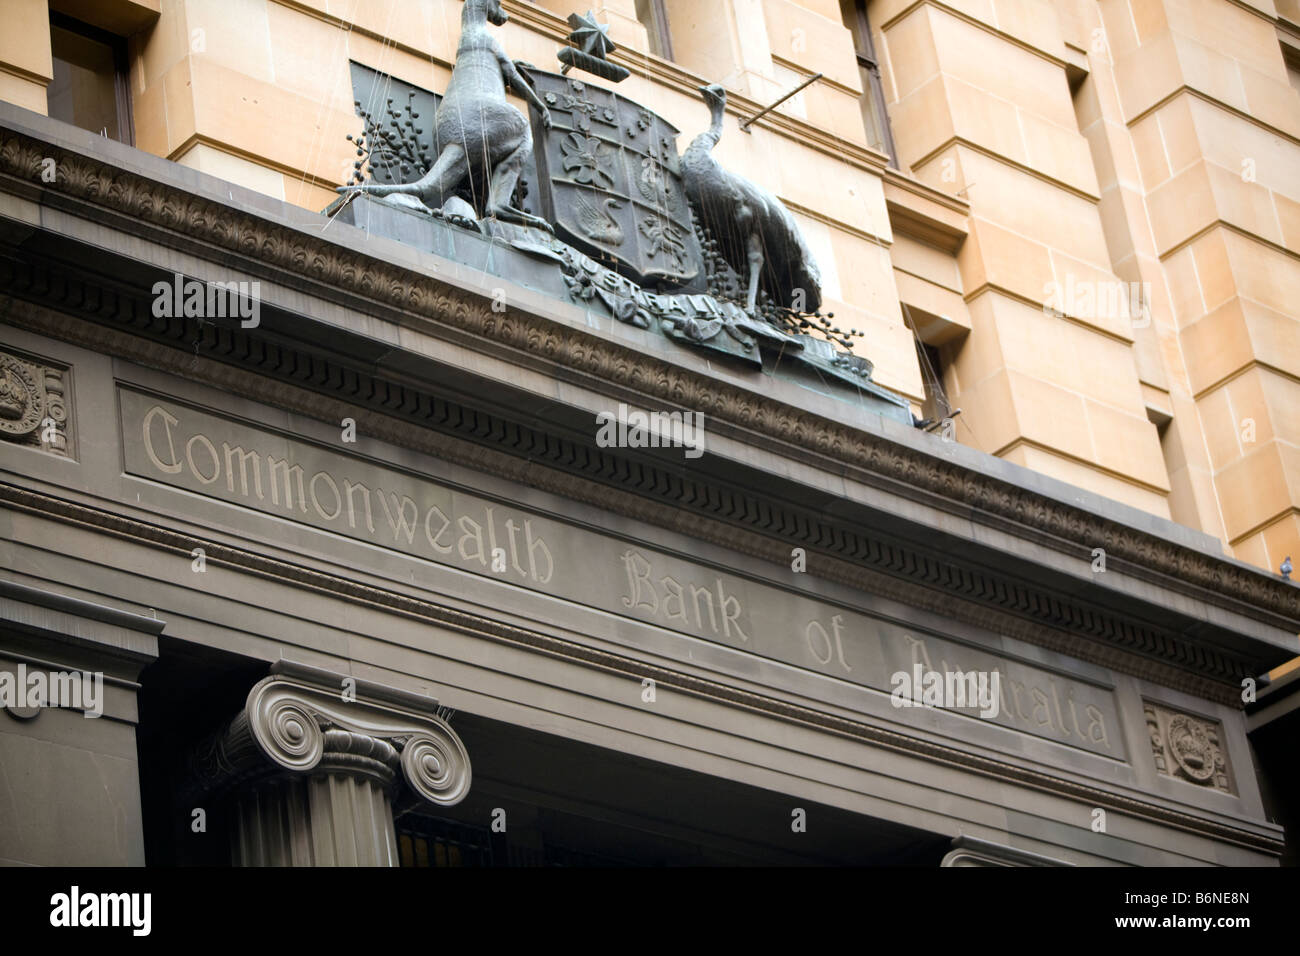 sign above entrance to commonwealth bank of australia building in pitt street,sydney Stock Photo